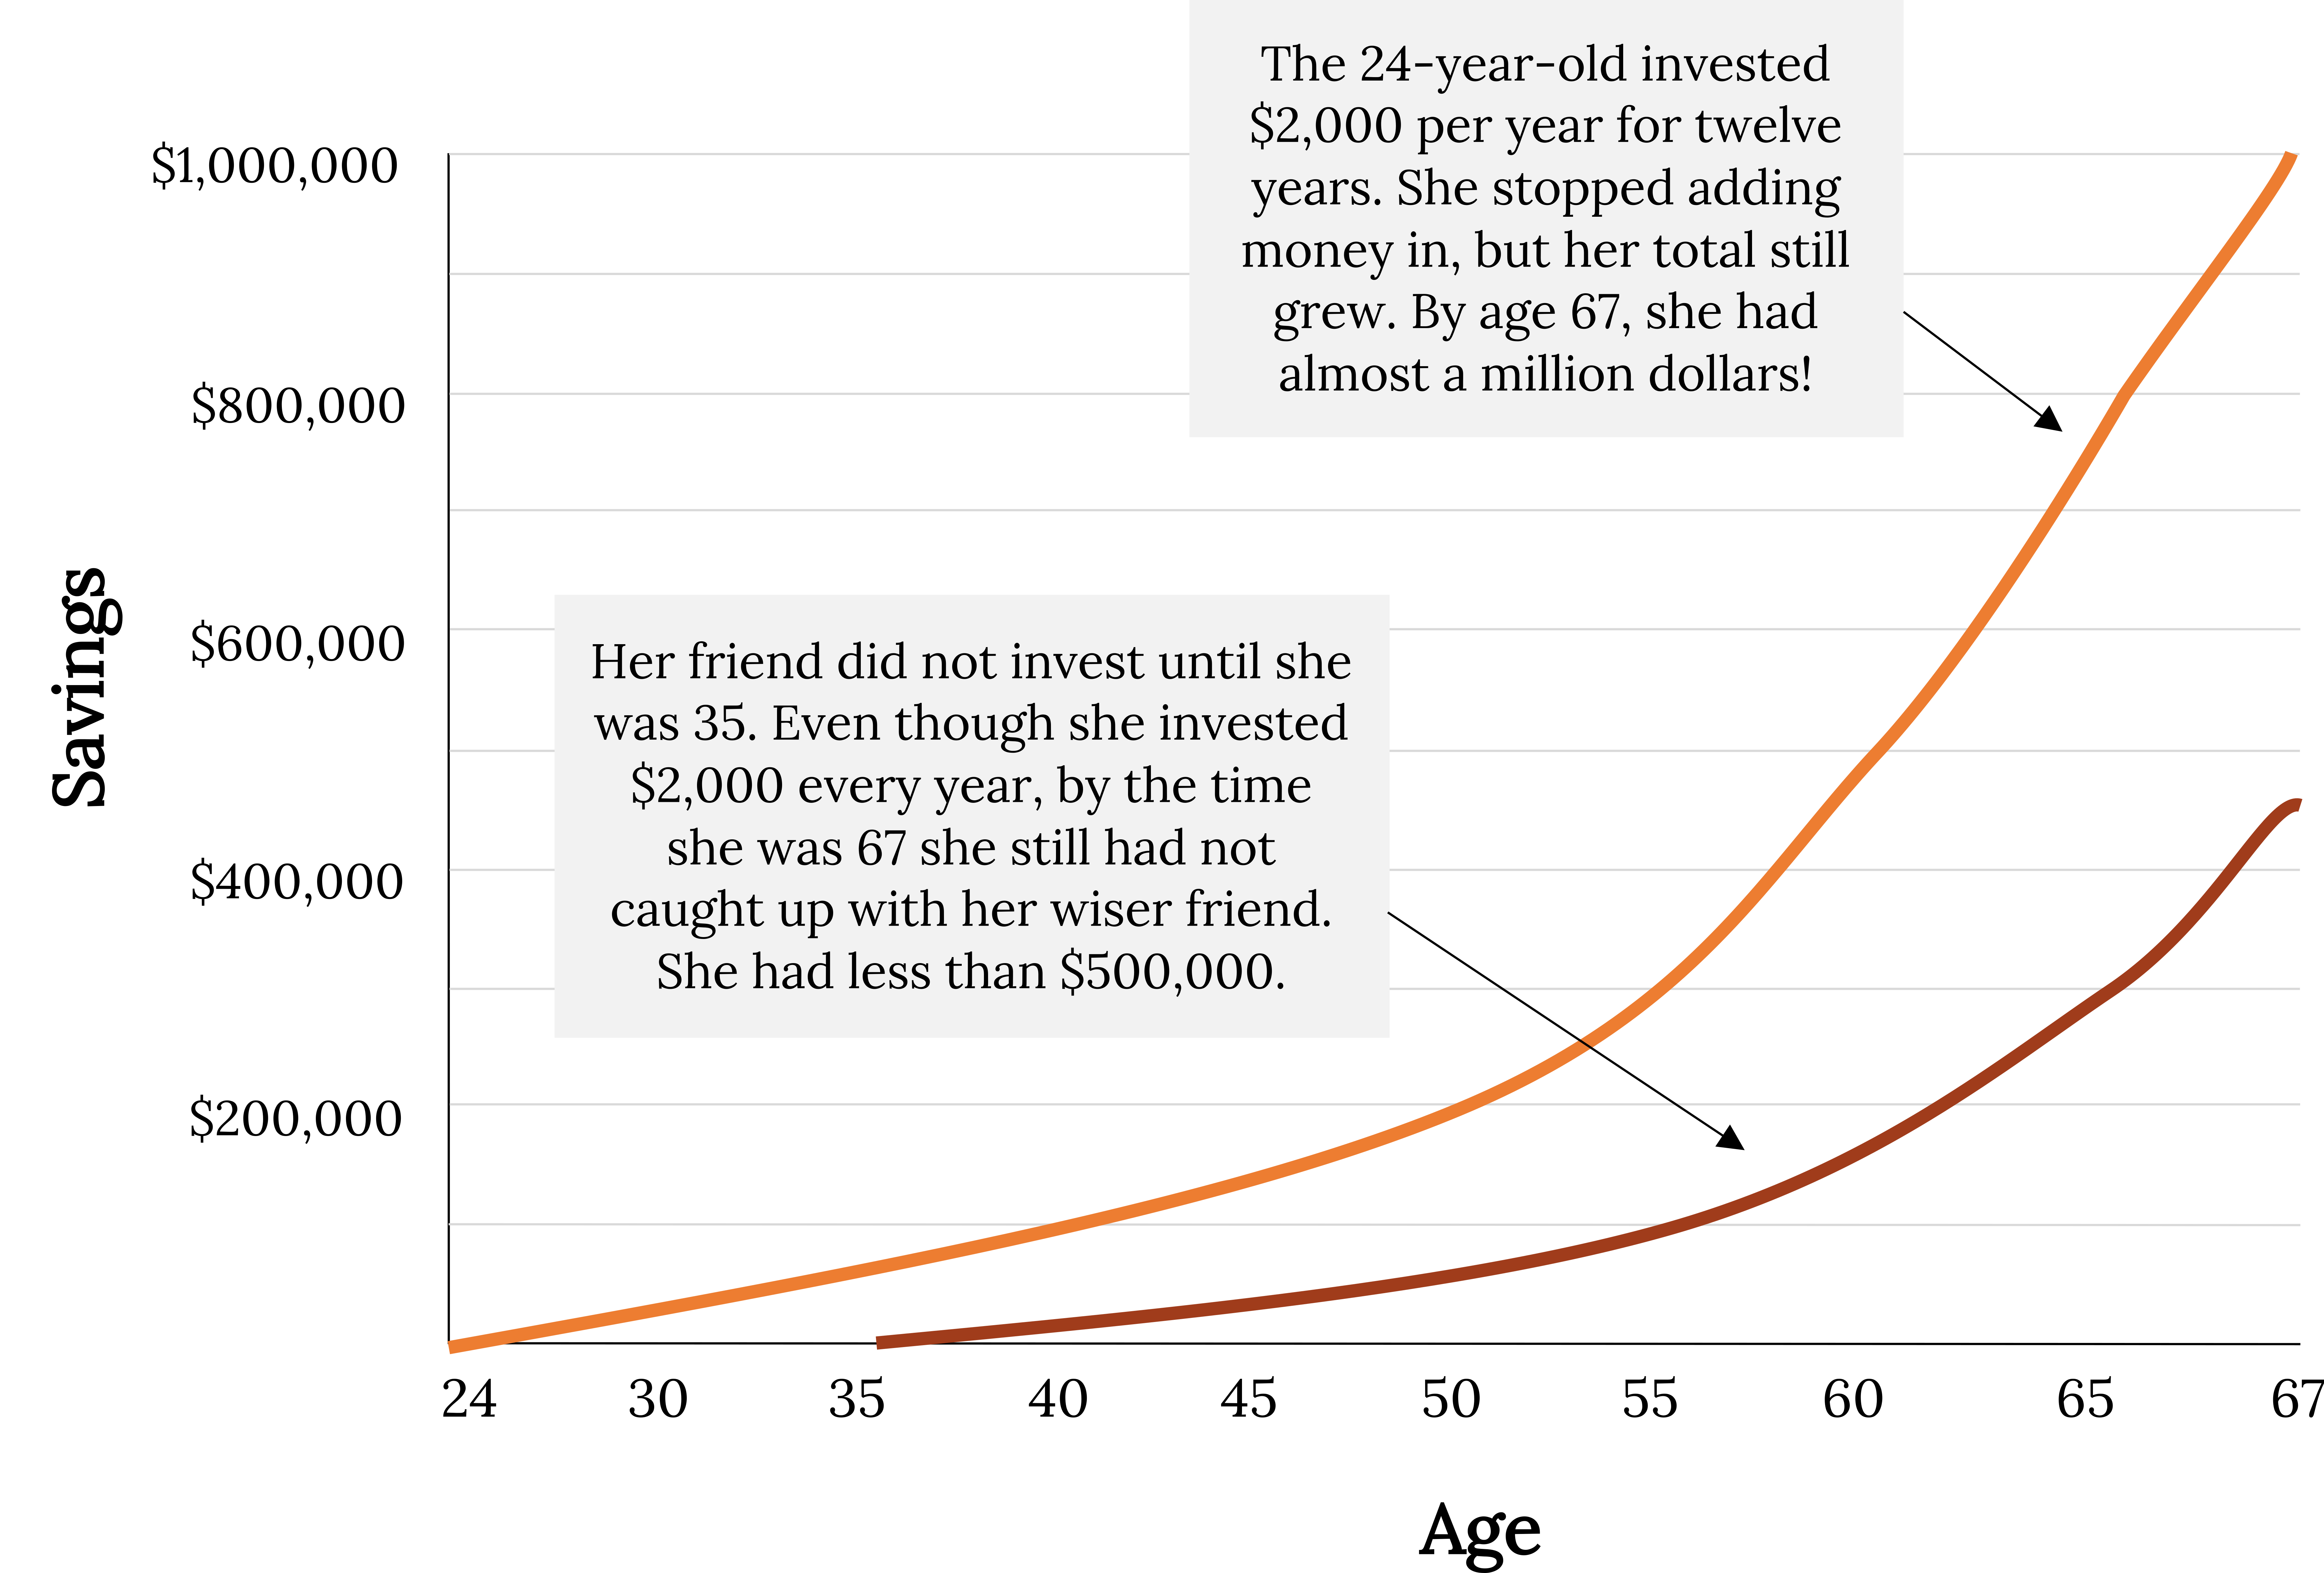 A line graph that represents two individuals compounding interest. The x-axis represents age: it begins at age 24, goes up to 30, then extends in 5 year increments to 65, with 67 also listed. The y-axis shows dollar amounts from $0 $1,000,000 in $200,000 increments. The first individual’s graph begins at age 24 at $0, and increases steadily to almost $1,000,000 by age 67. A text box is connected to the line and says: “The 24 year old invested $2,000 per year for twelve years. She stopped adding money in, but her total still grew: by age 67, she had almost a million dollars!” The second individual’s graph begins at age 35 at $0, then increases steadily to less than $500,000. A text box is connected to the line and says: “Her friend did not invest until she was 35. Even though she invested $2,000 every year, by the time she was 67, she still had not caught up with her wiser friend: she had less than $500,000.”